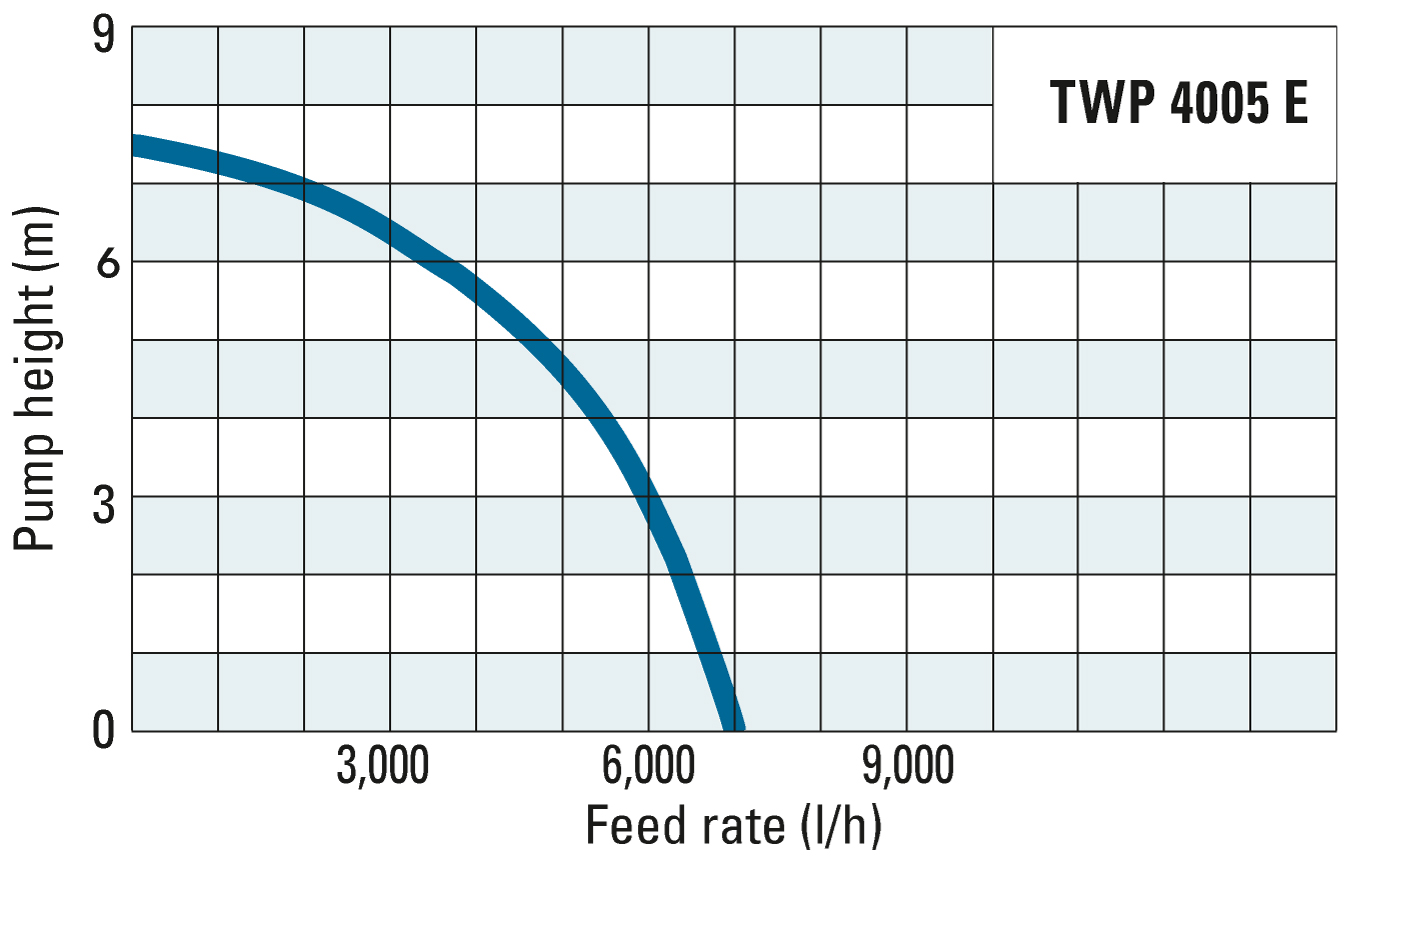 Pump height and feed rate of the TWP 4005 E